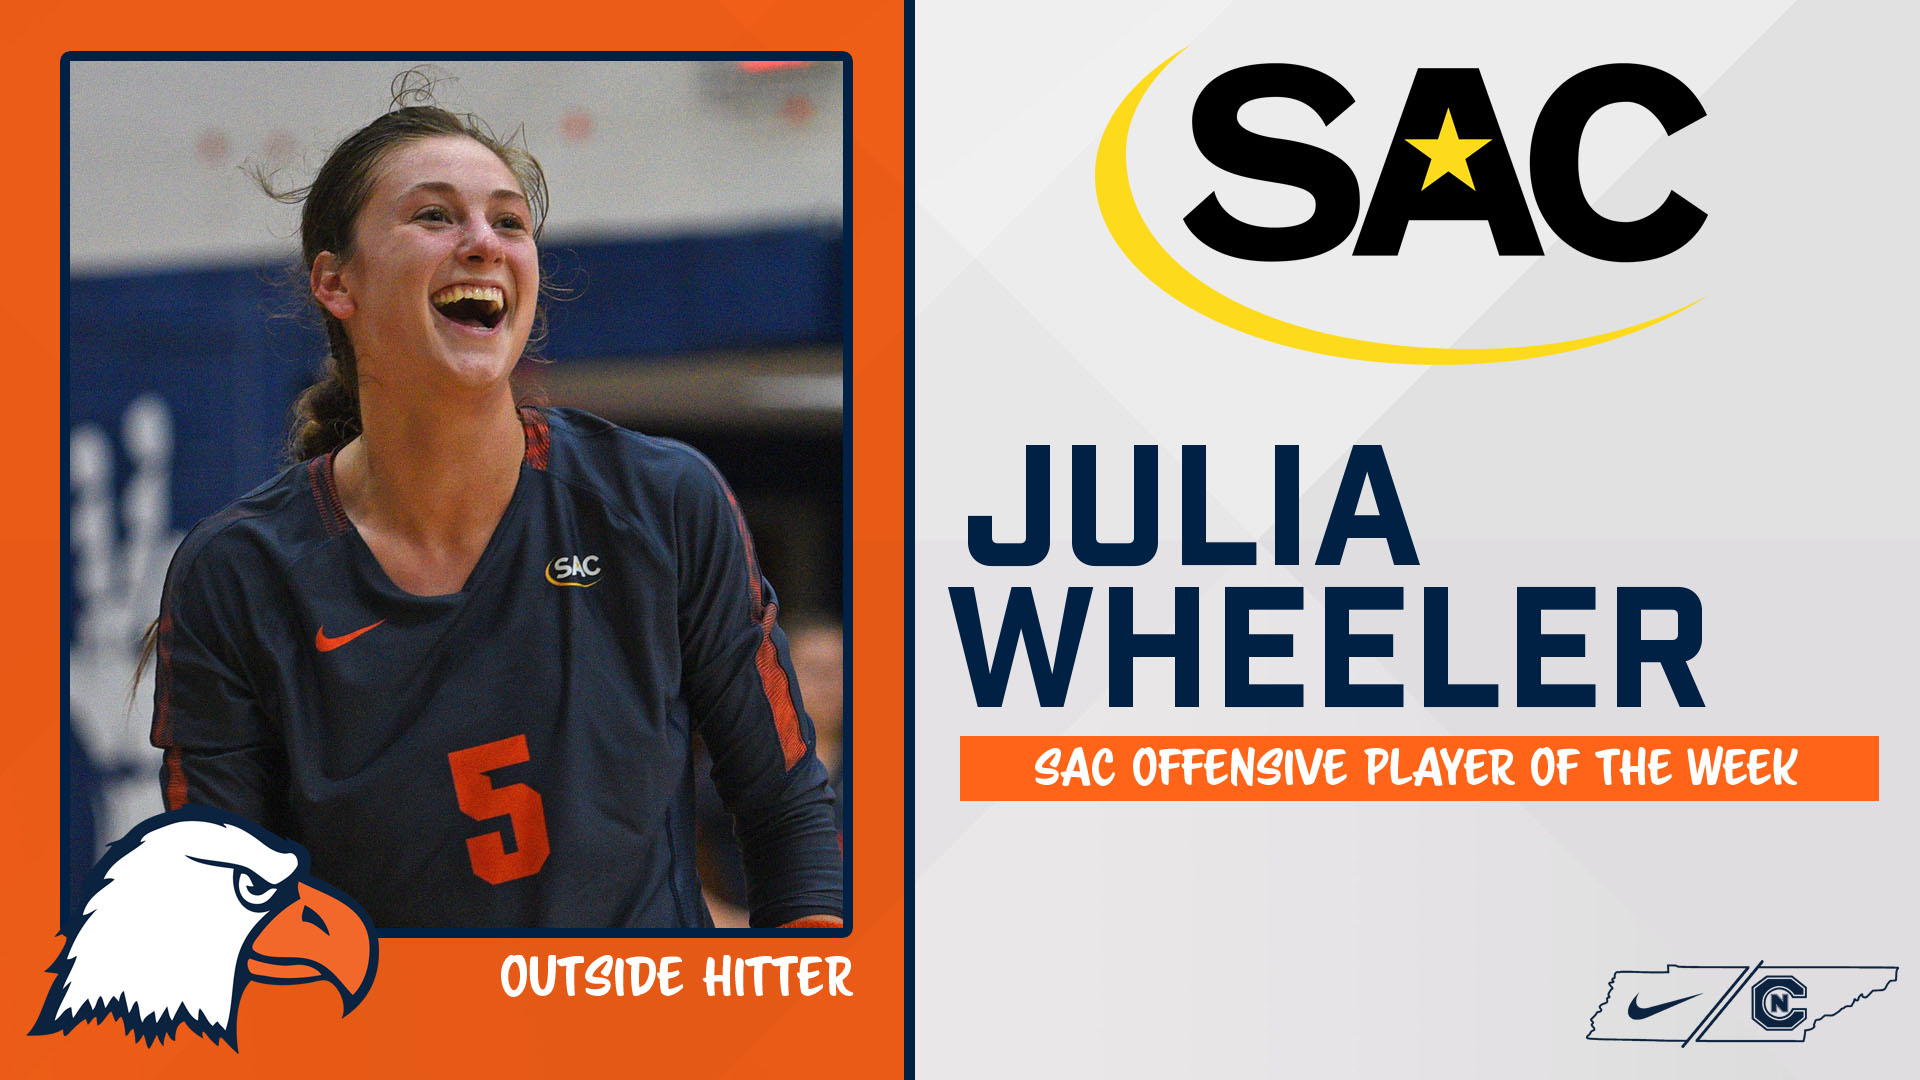 SAC lauds Wheeler with Player of the Week nod